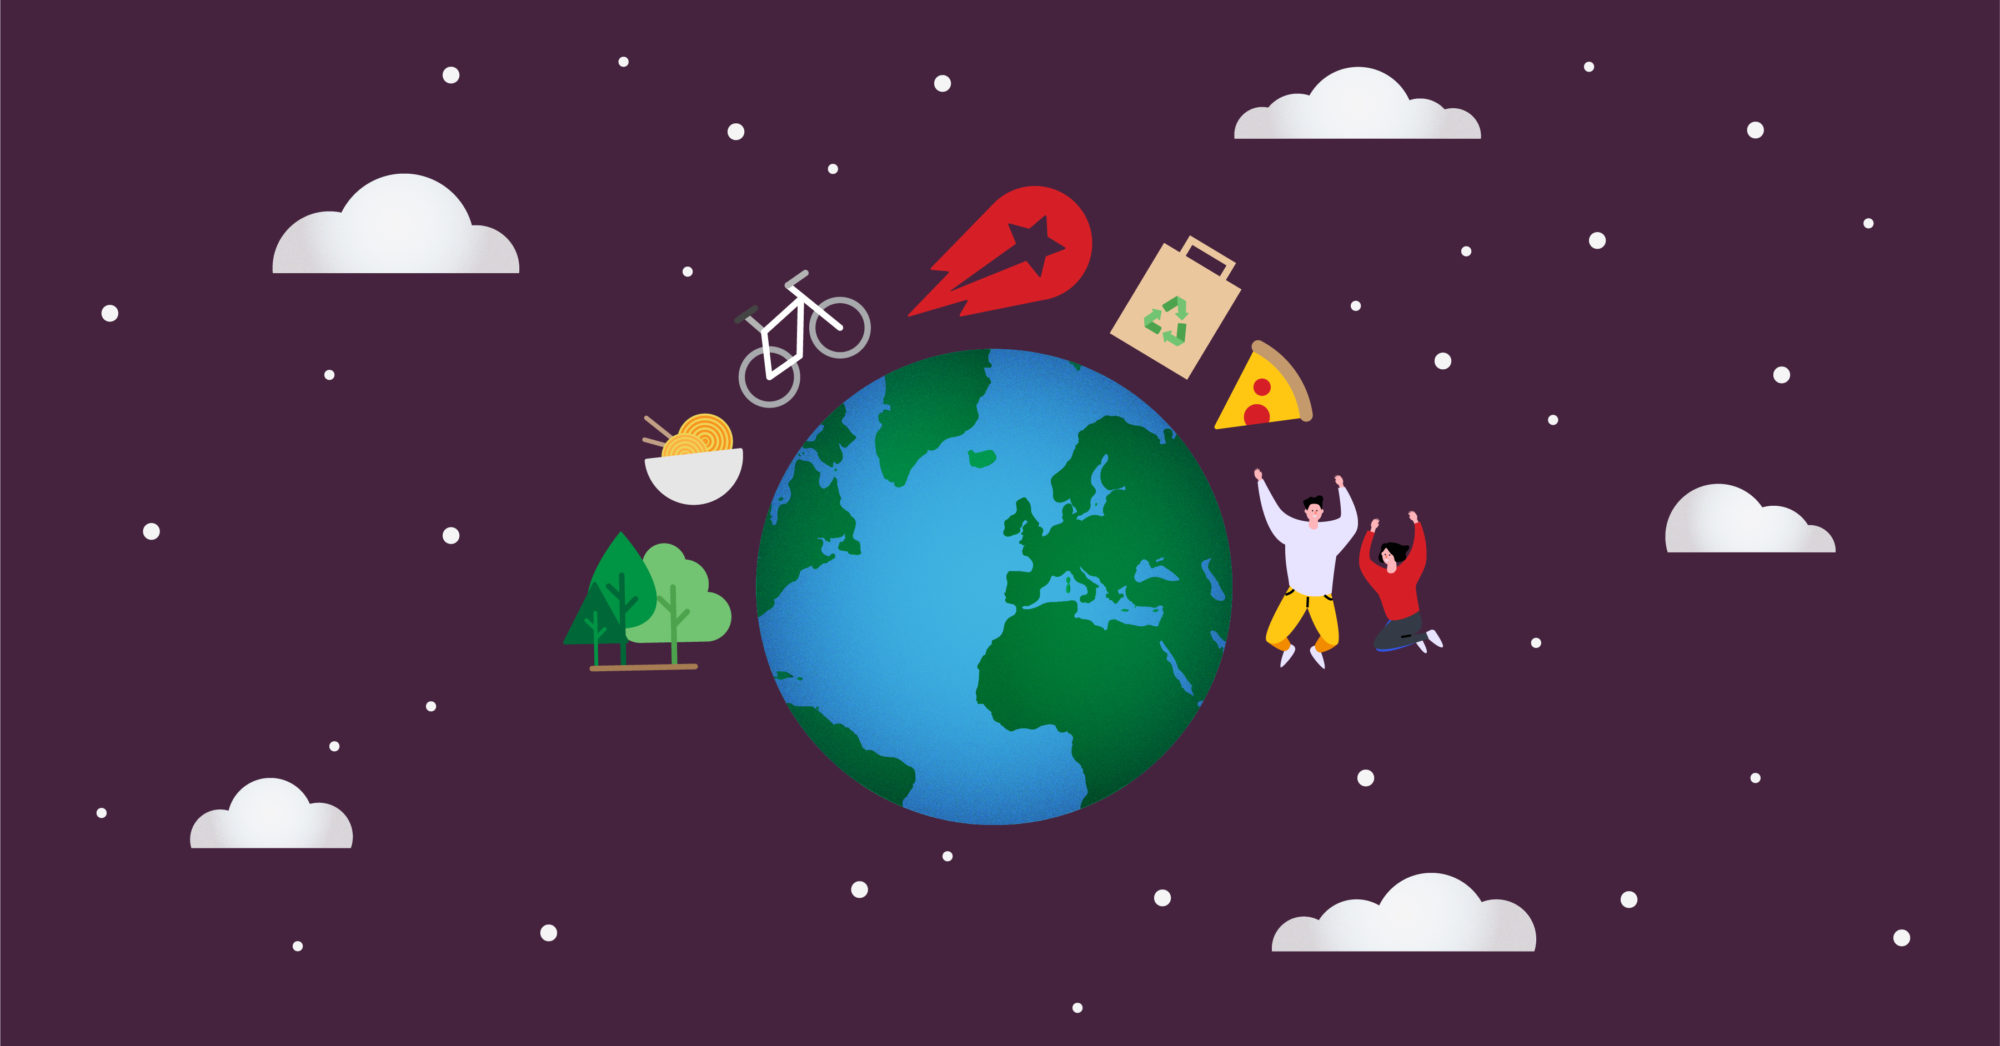 Delivery Hero continues to strengthen its green program by investing in sustainable solutions